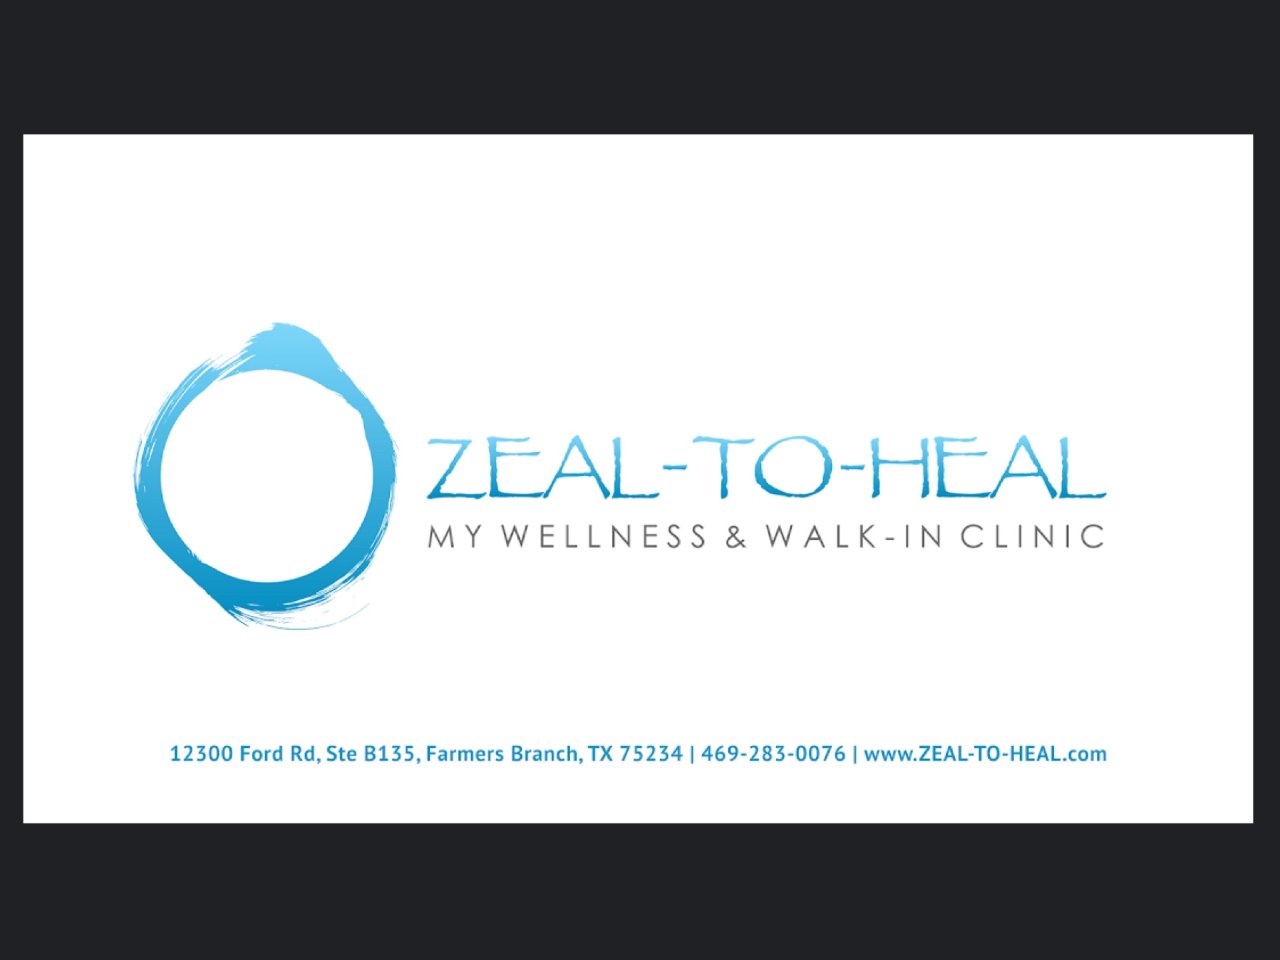 ZEAL-TO-HEAL 3